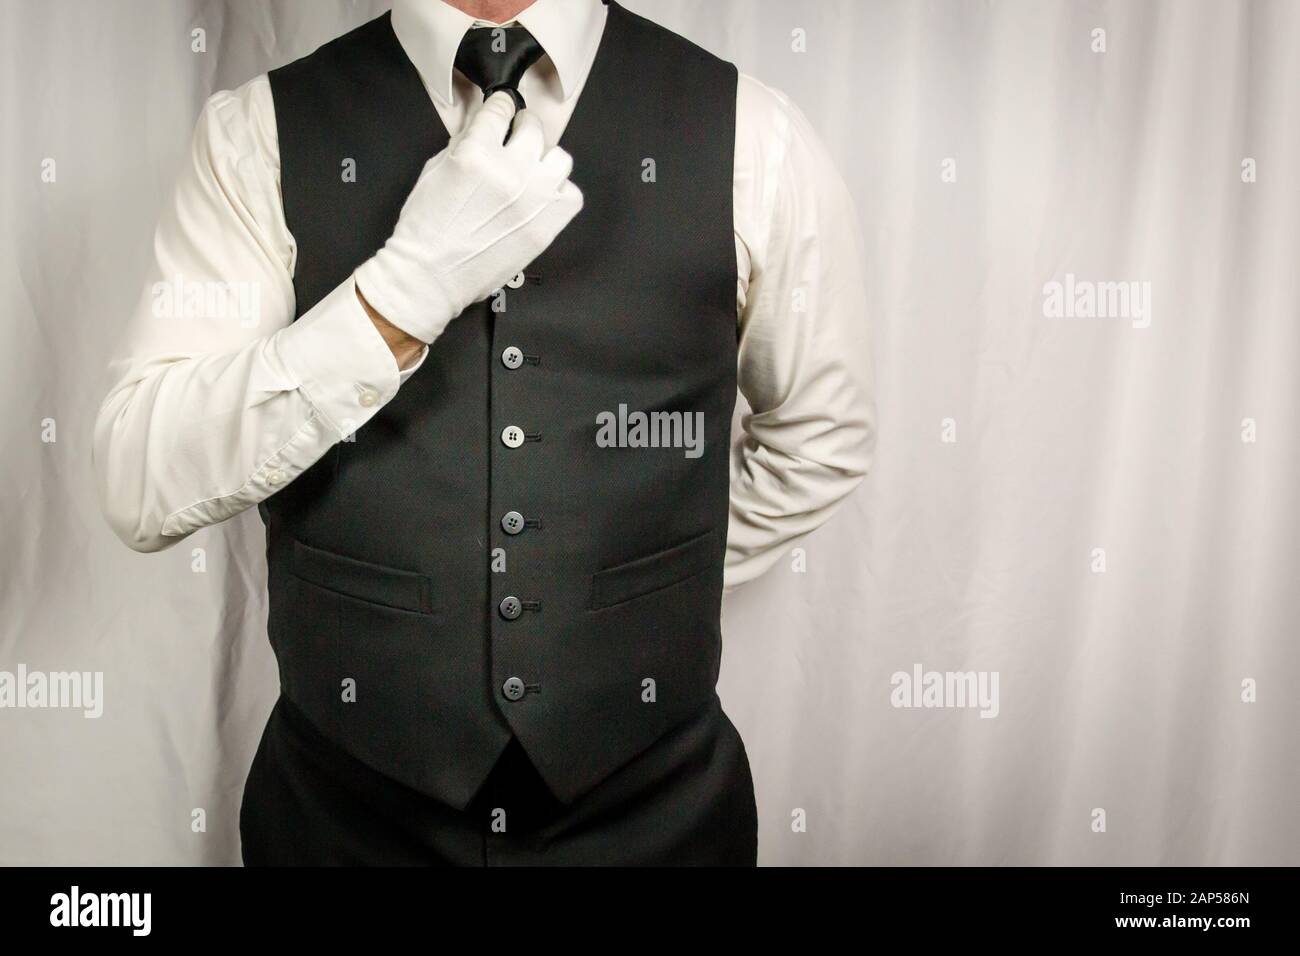 Man in Waistcoat and White Gloves Straightening Tie. Concept of Service Industry and Professional Hospitality and Courtesy. Stock Photo